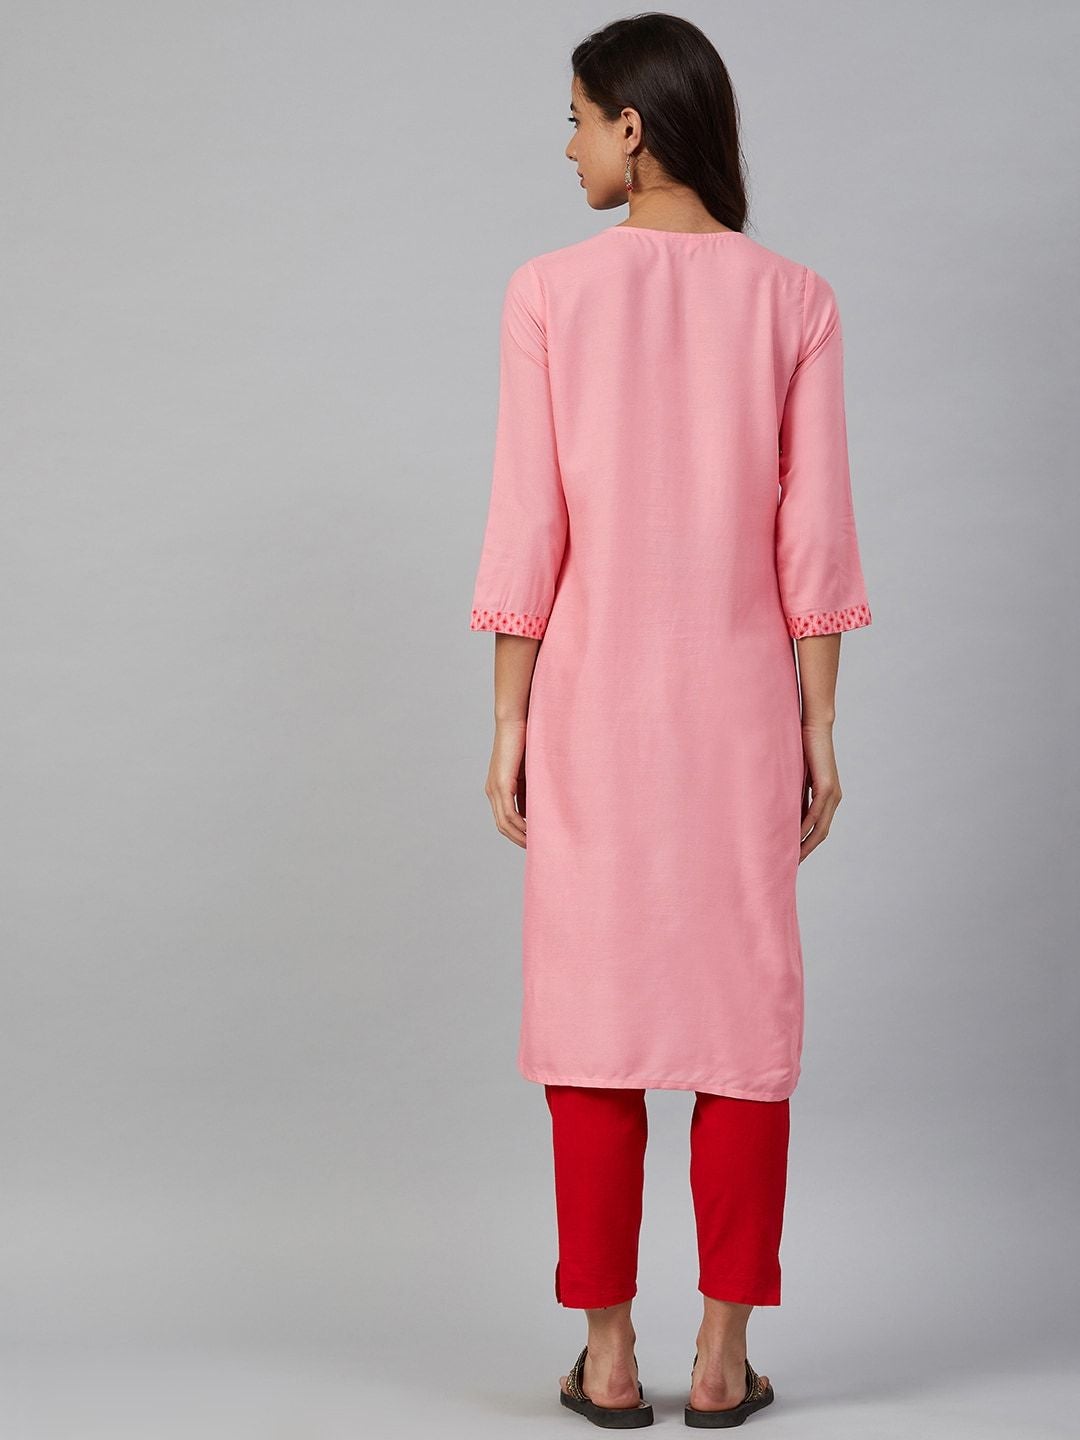 Women's Pink Solid Straight Kurta with Attached Ethnic Jacket - Meeranshi